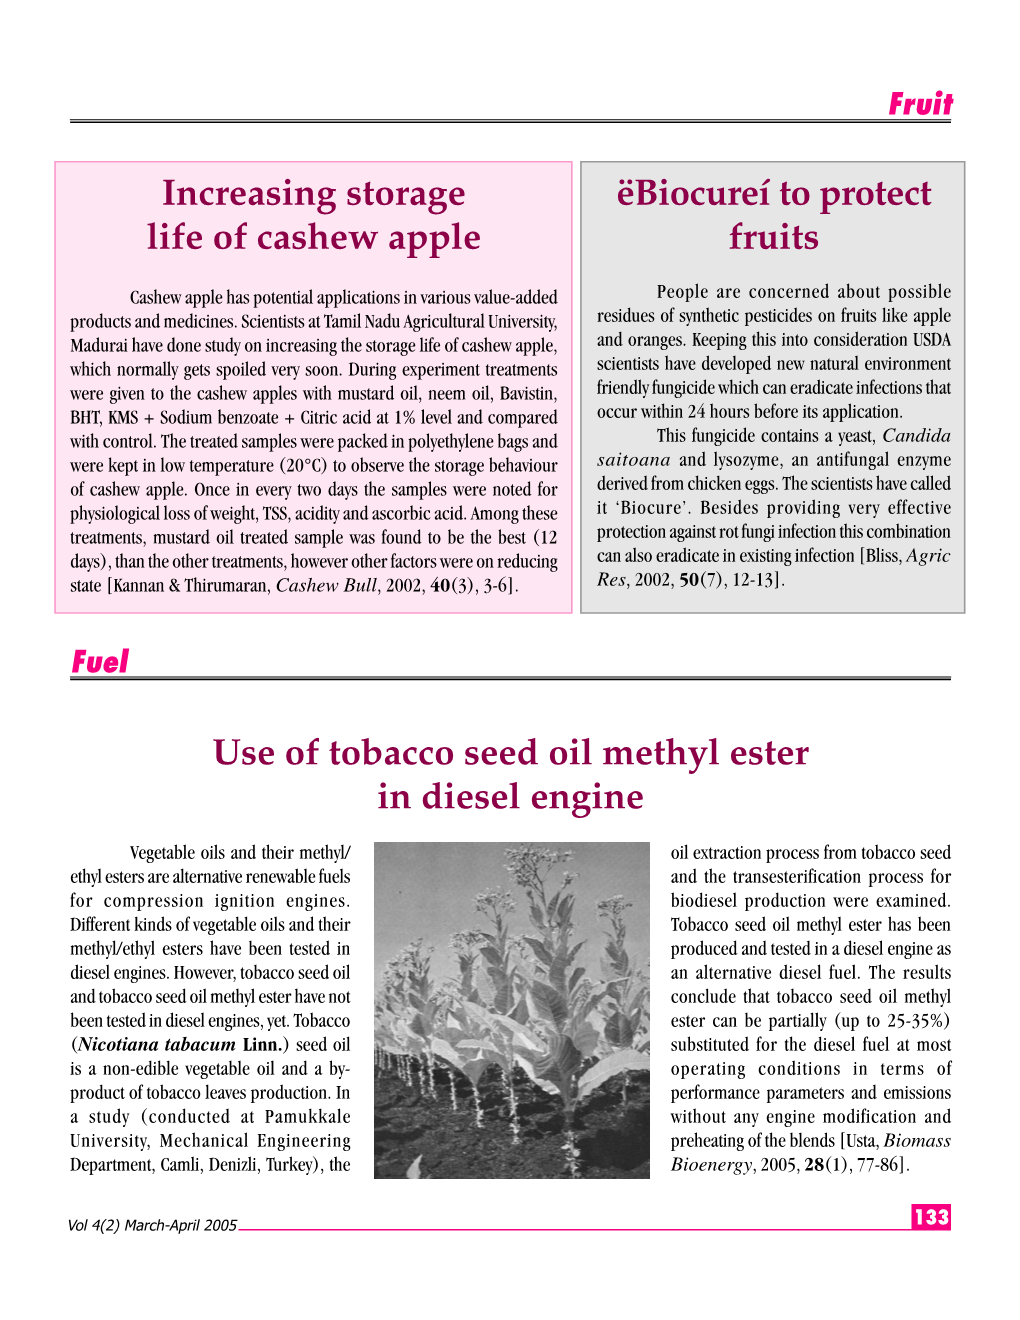 Ëbiocureí to Protect Fruits Increasing Storage Life of Cashew Apple Use of Tobacco Seed Oil Methyl Ester in Diesel Engine